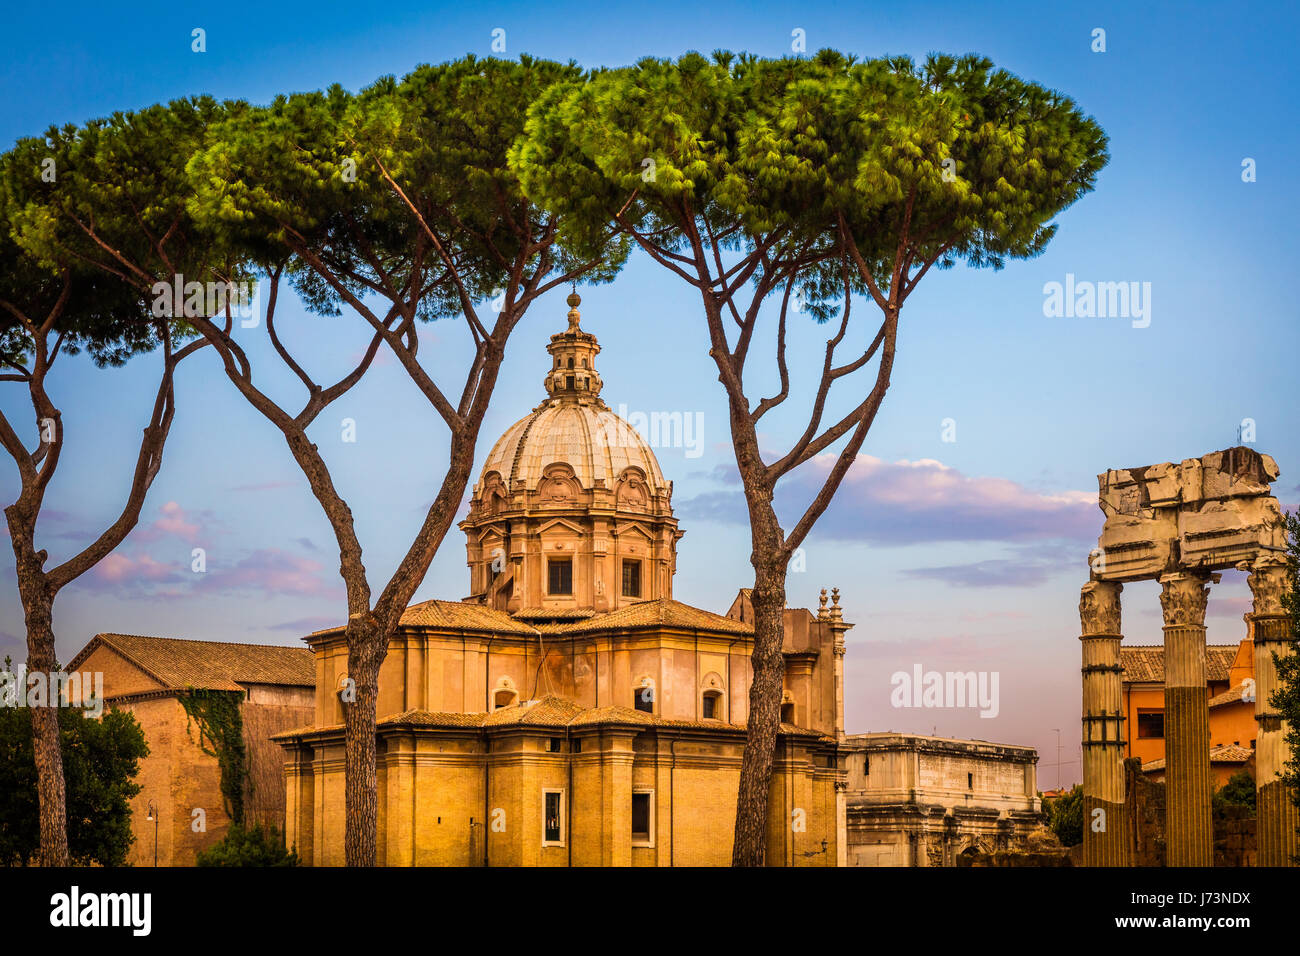 Santi Luca e Martina is a church in Rome, Italy, situated between the Roman Forum and the Forum of Caesar and close to the Arch of Septimus Severus. T Stock Photo